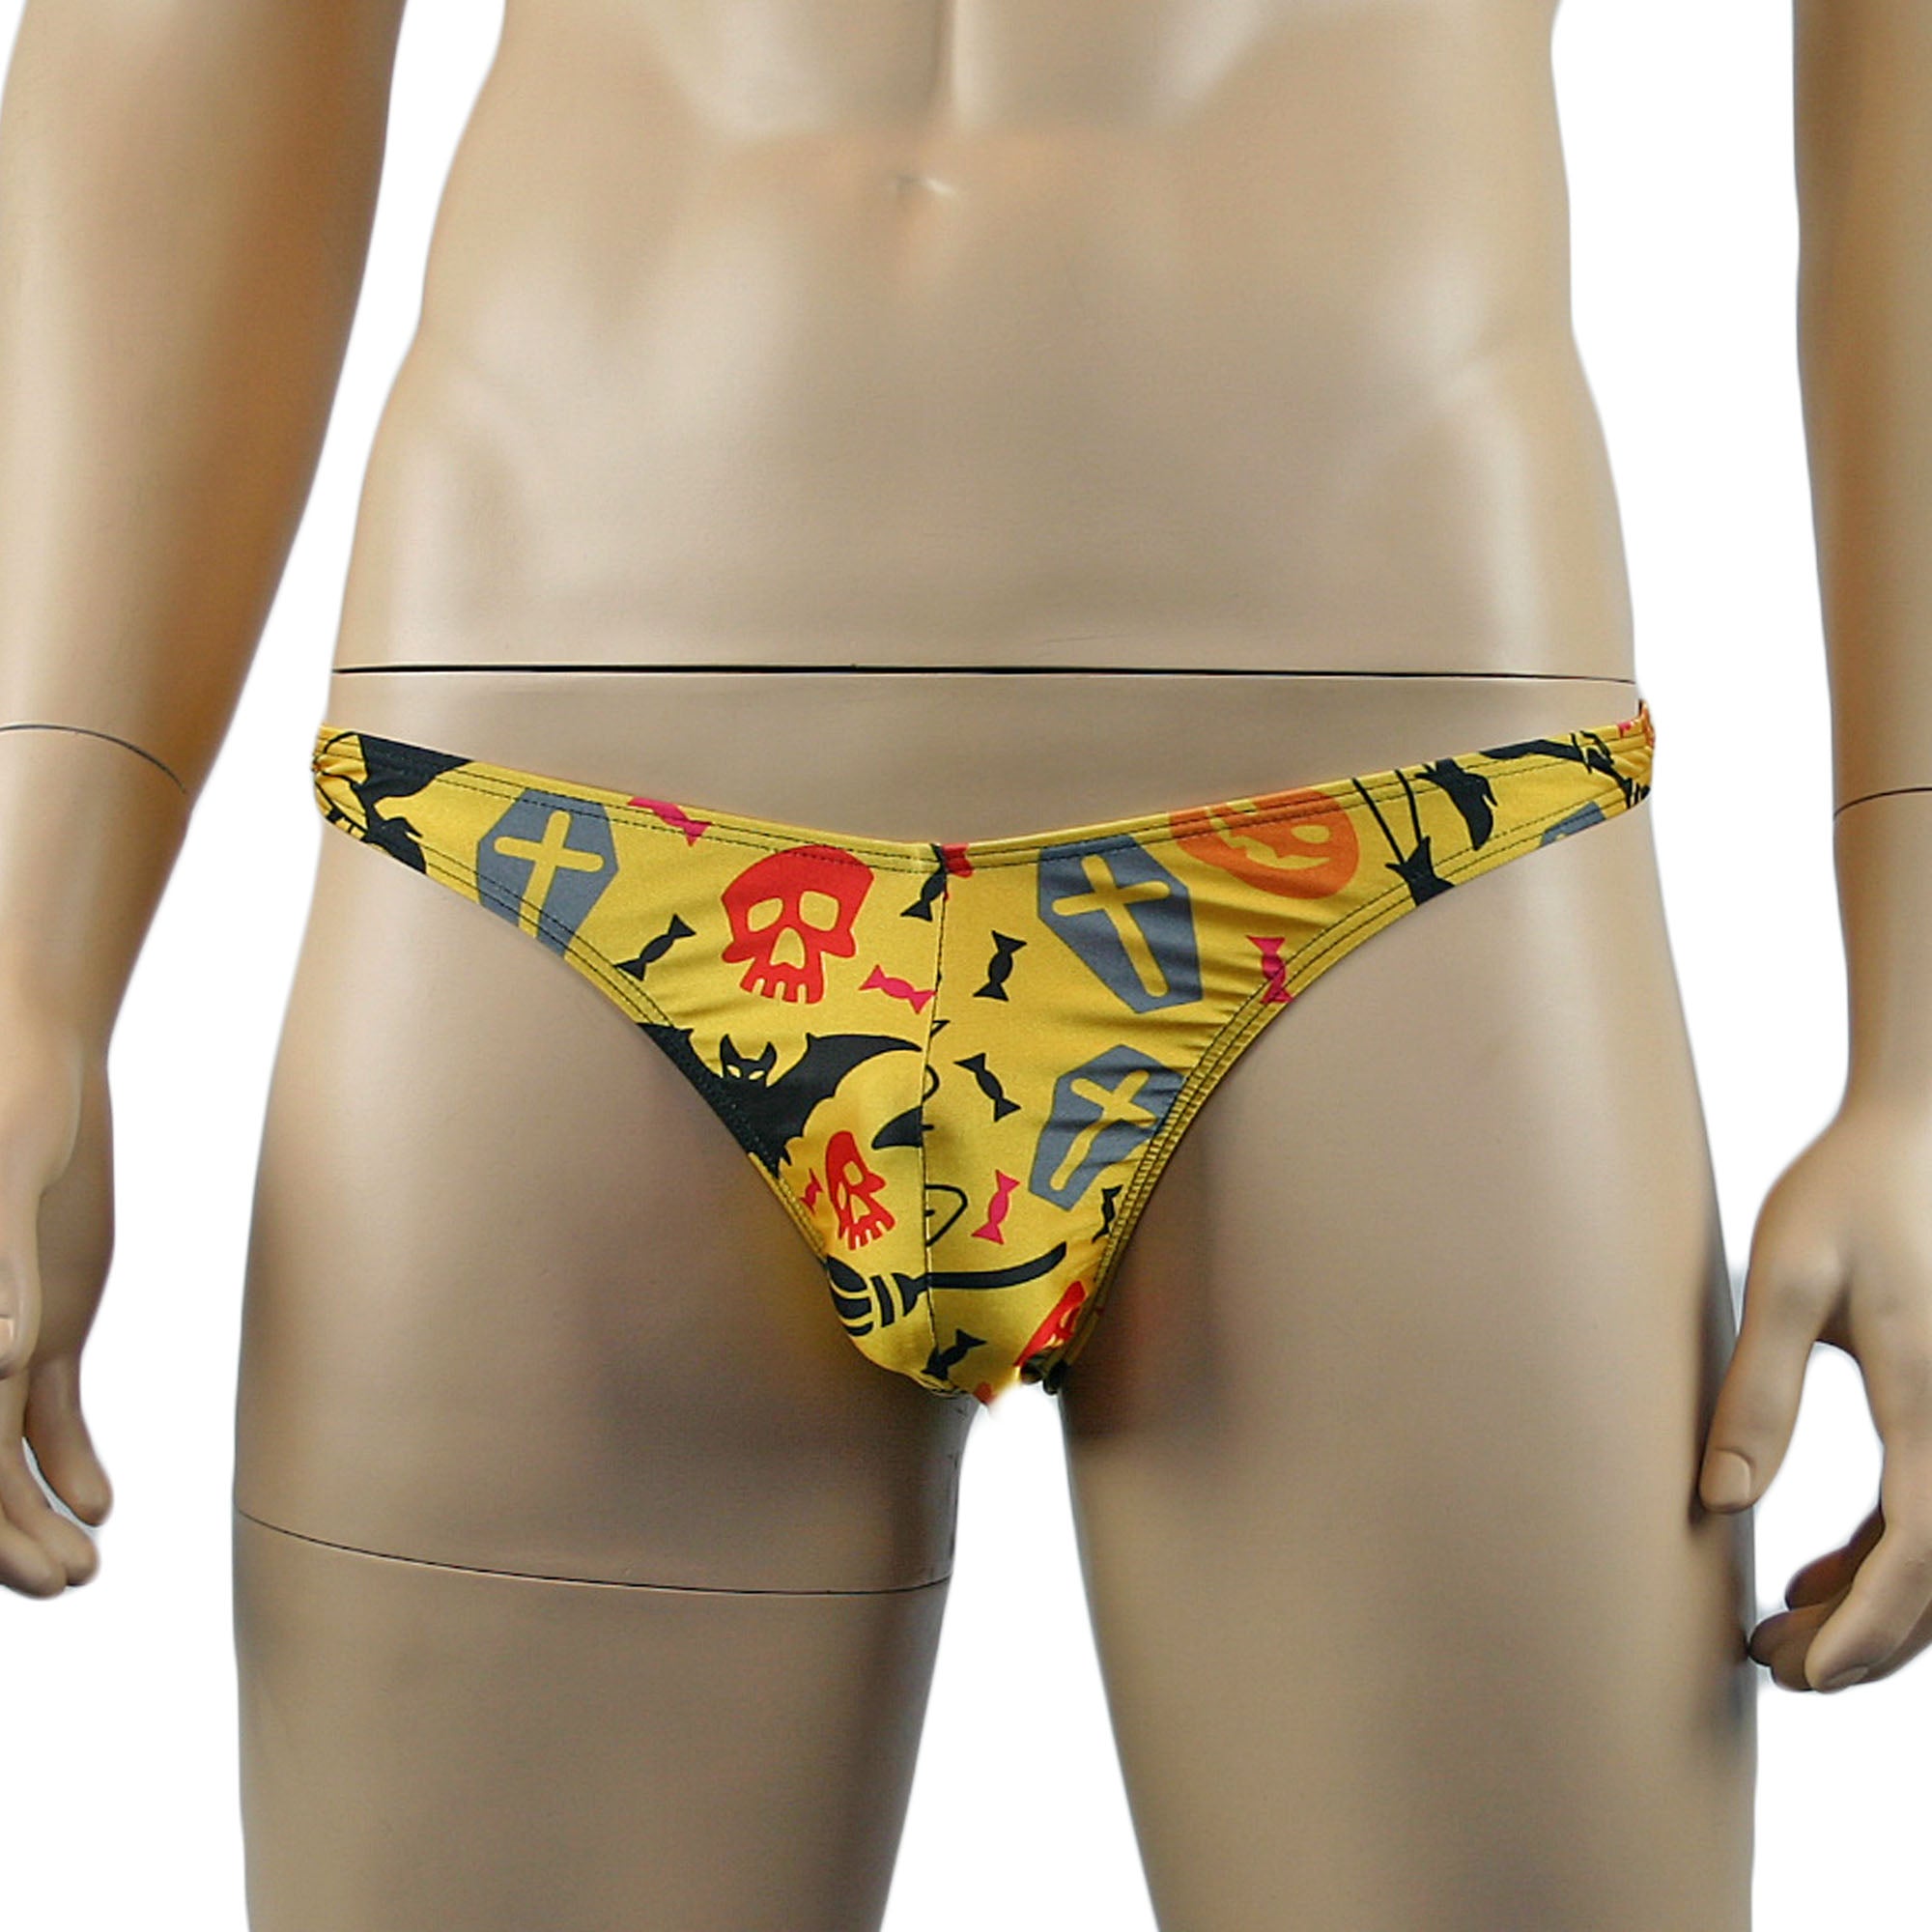 Mens Gothic Halloween Thong Underwear, Witches, Bats & Cats